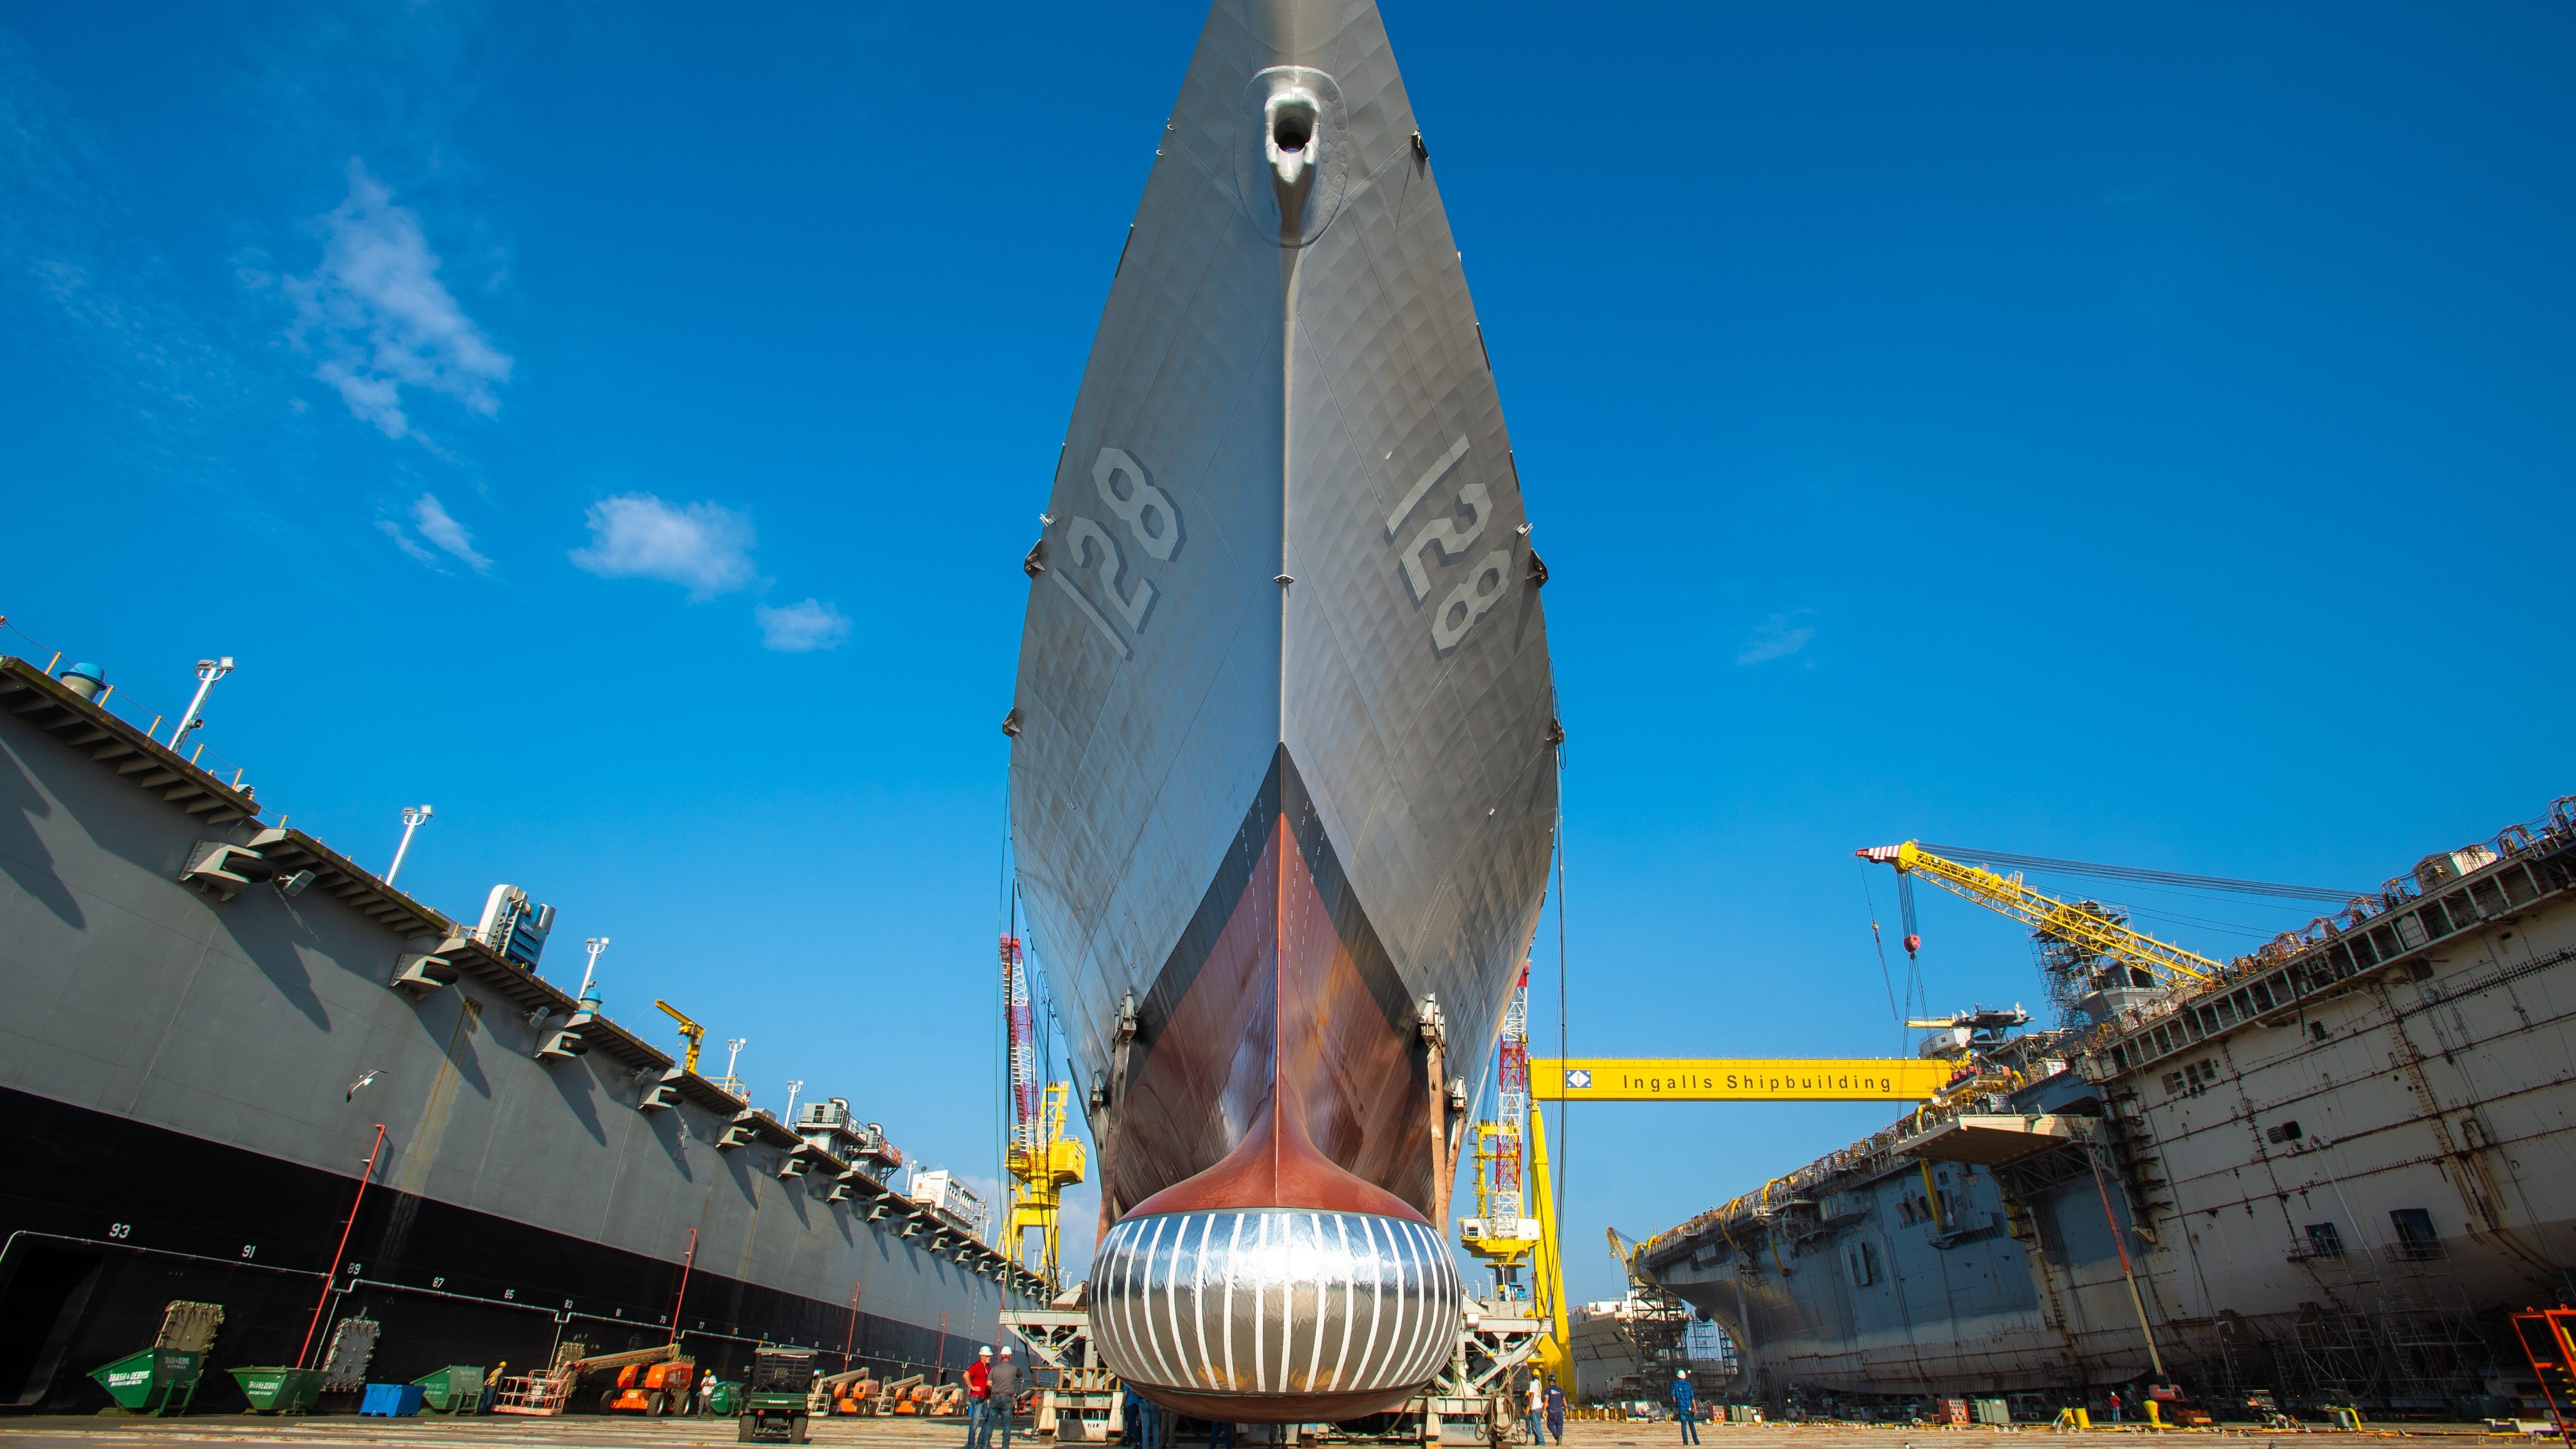 U.S. Navy Guided Missile Destroyers - Ingalls Shipbuilding